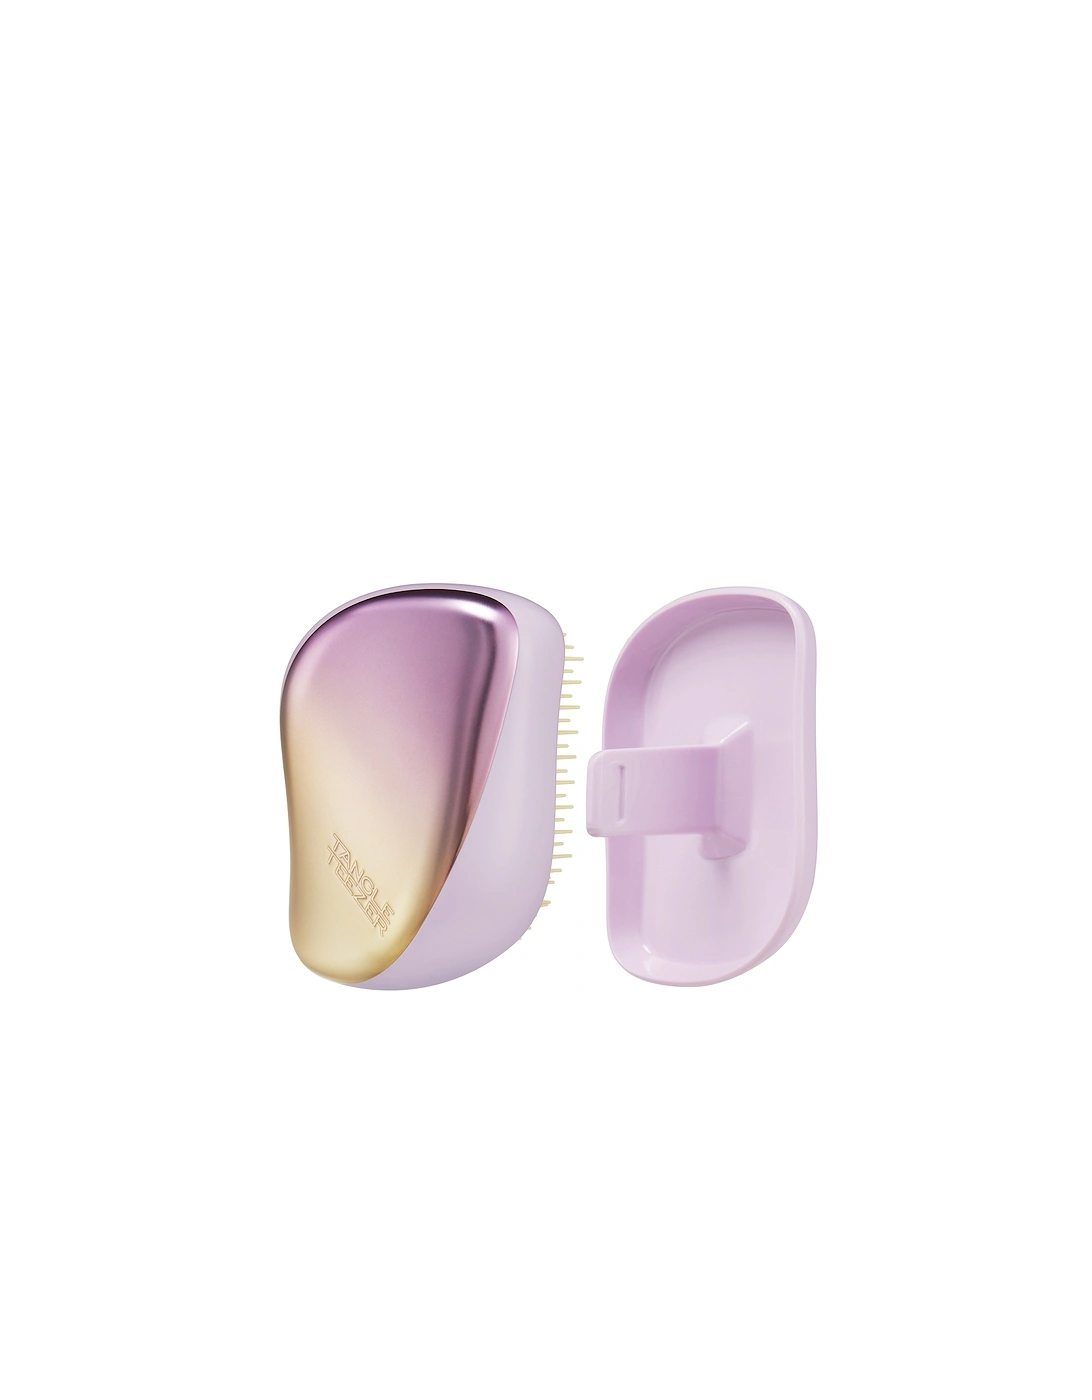 Compact Styler Brush - Lilac/Yellow Chrome, 2 of 1